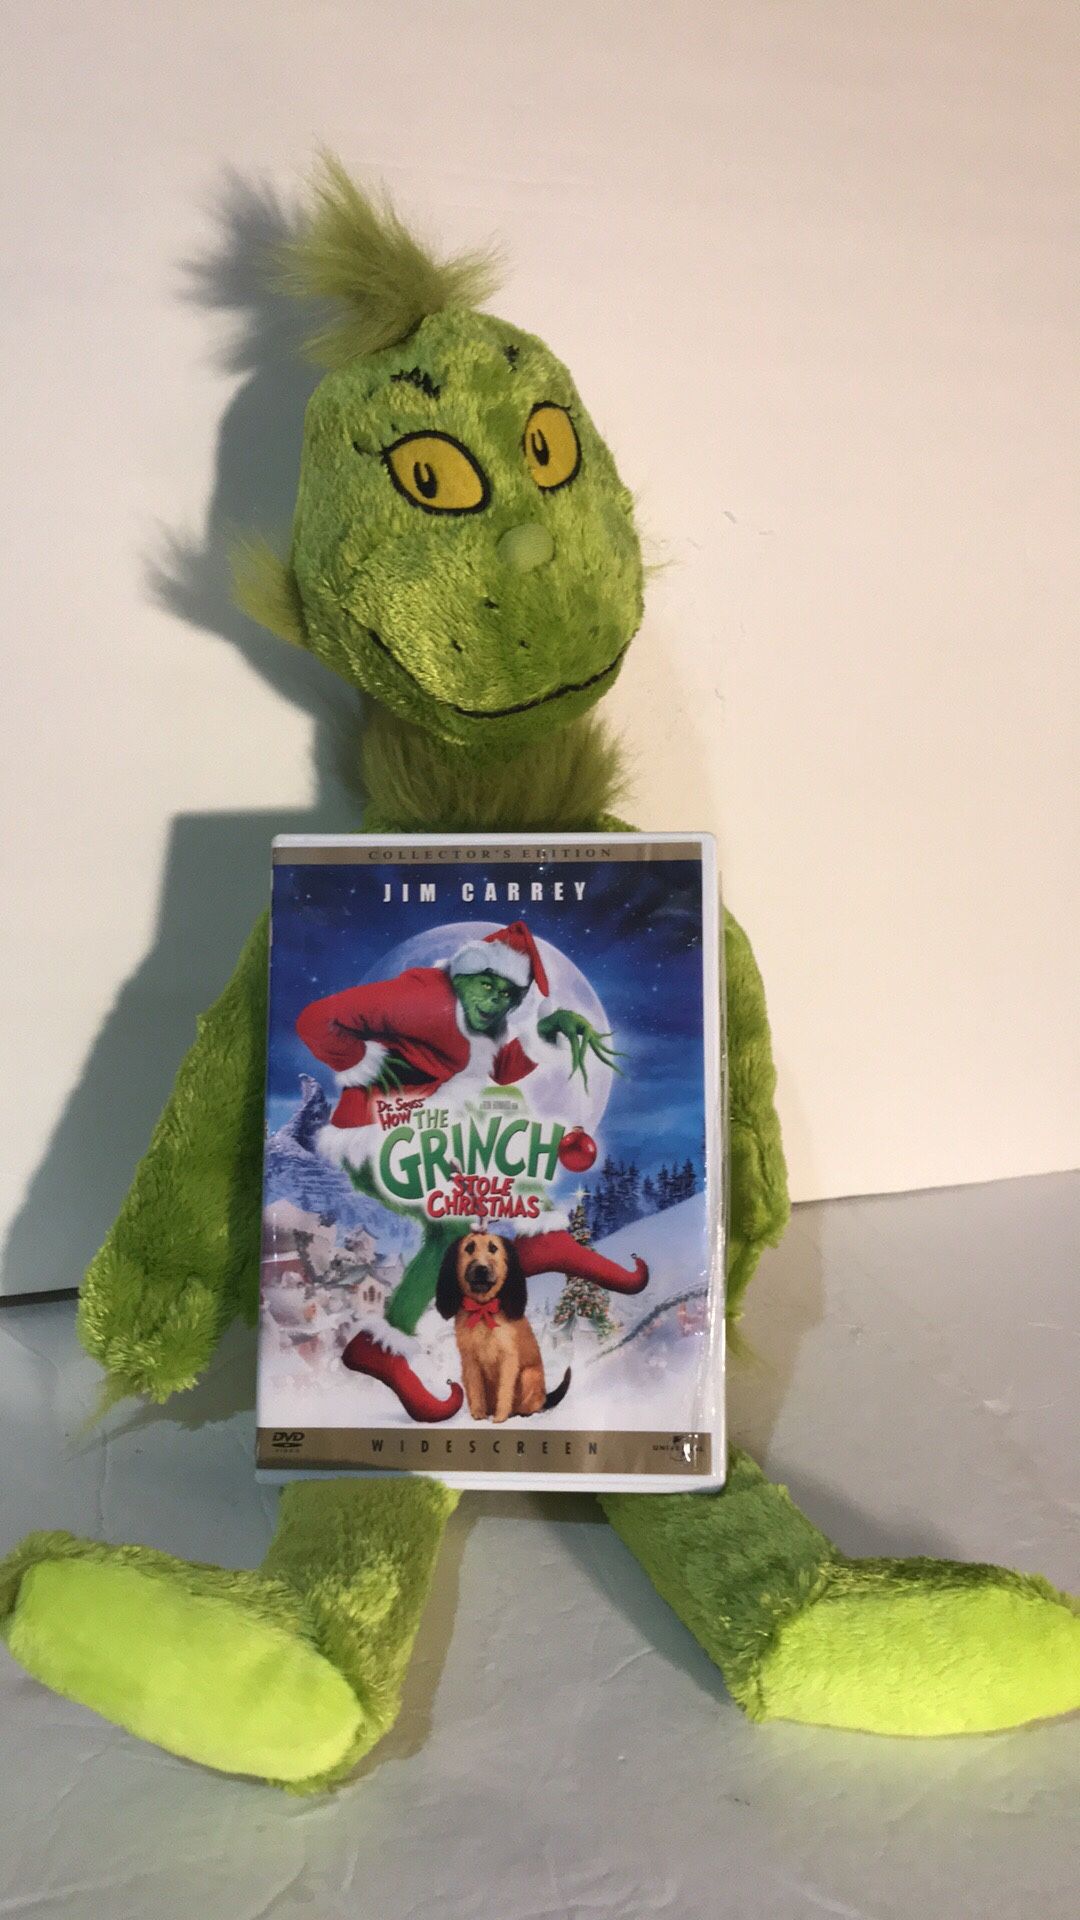 How the grinch stole Christmas dvd and grinch